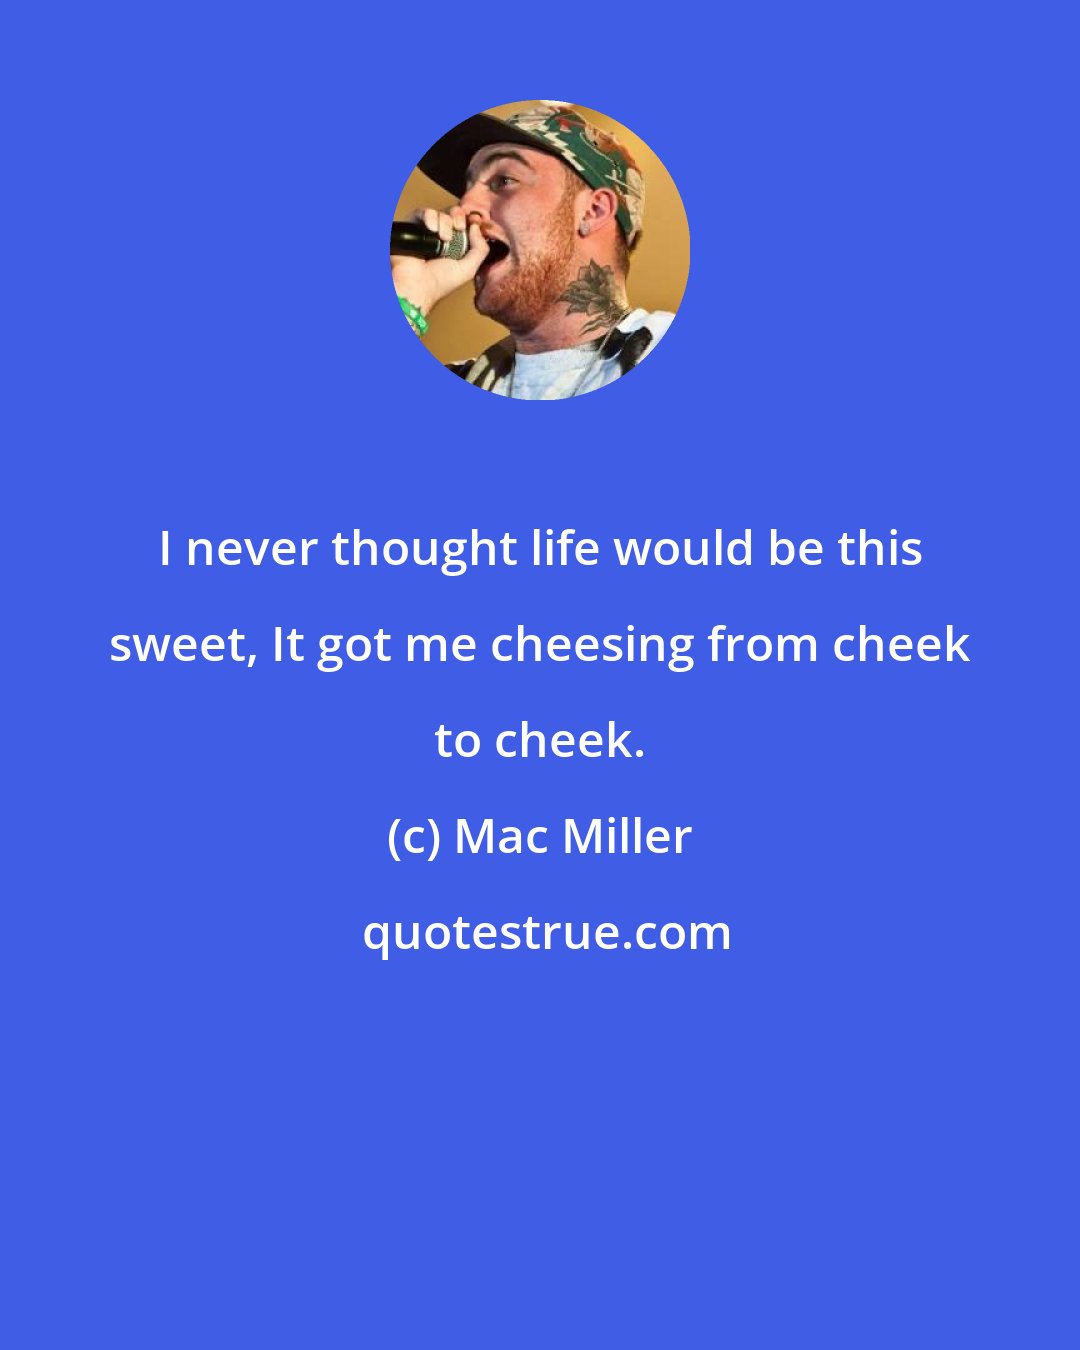 Mac Miller: I never thought life would be this sweet, It got me cheesing from cheek to cheek.